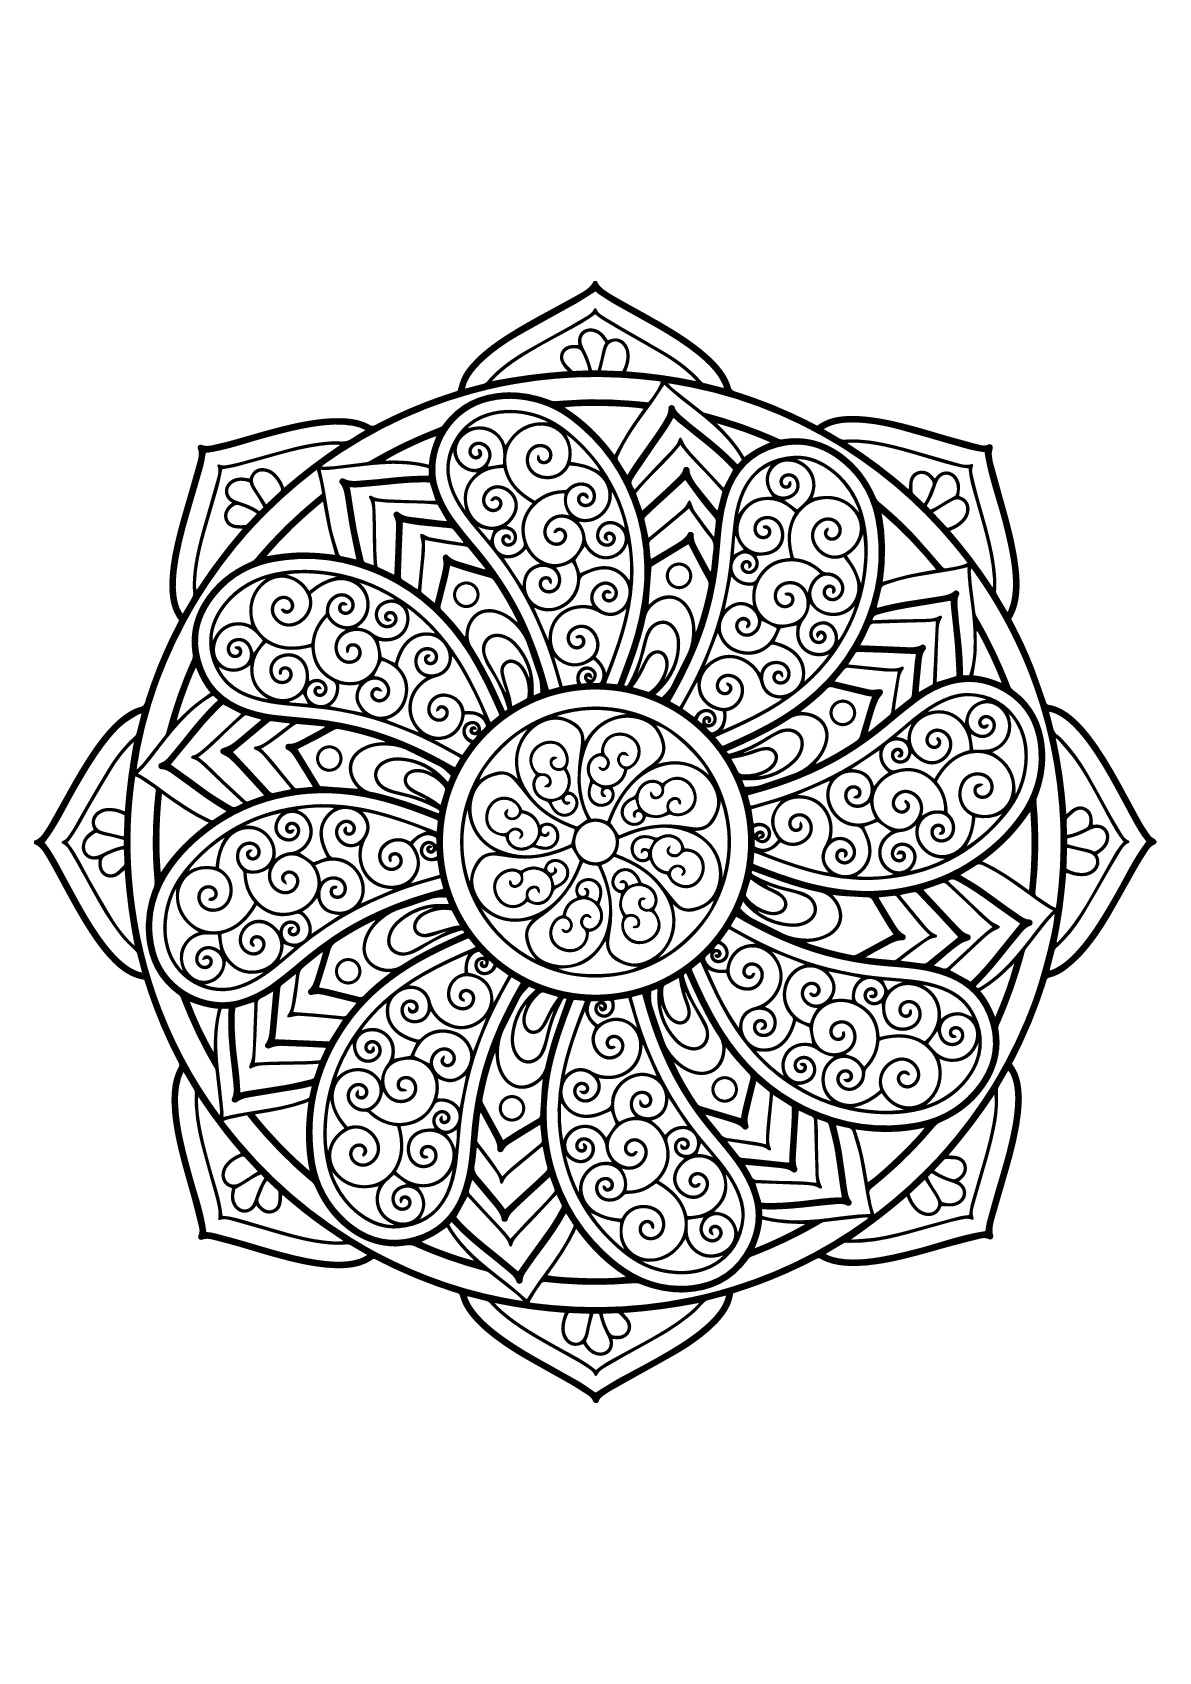 Complex mandala from a free coloring book